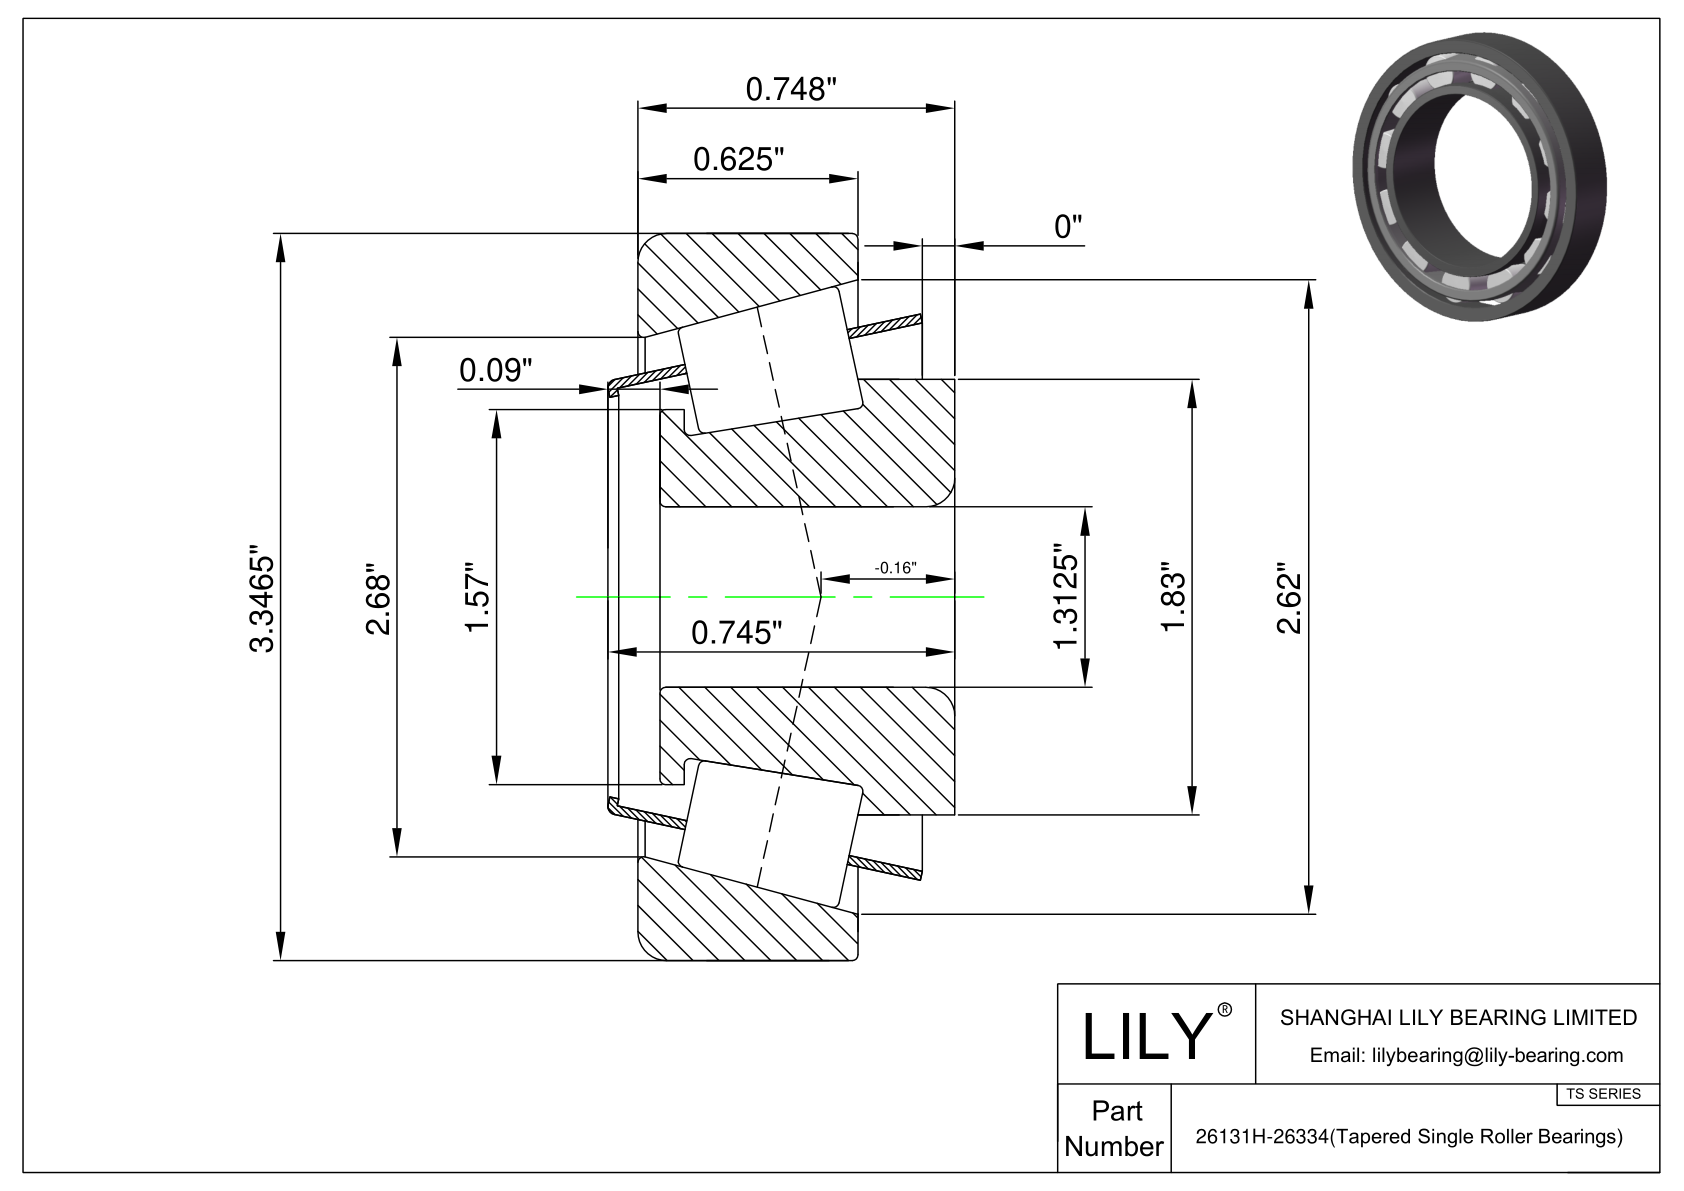 26131H-26334 TS (Tapered Single Roller Bearings) (Imperial) cad drawing